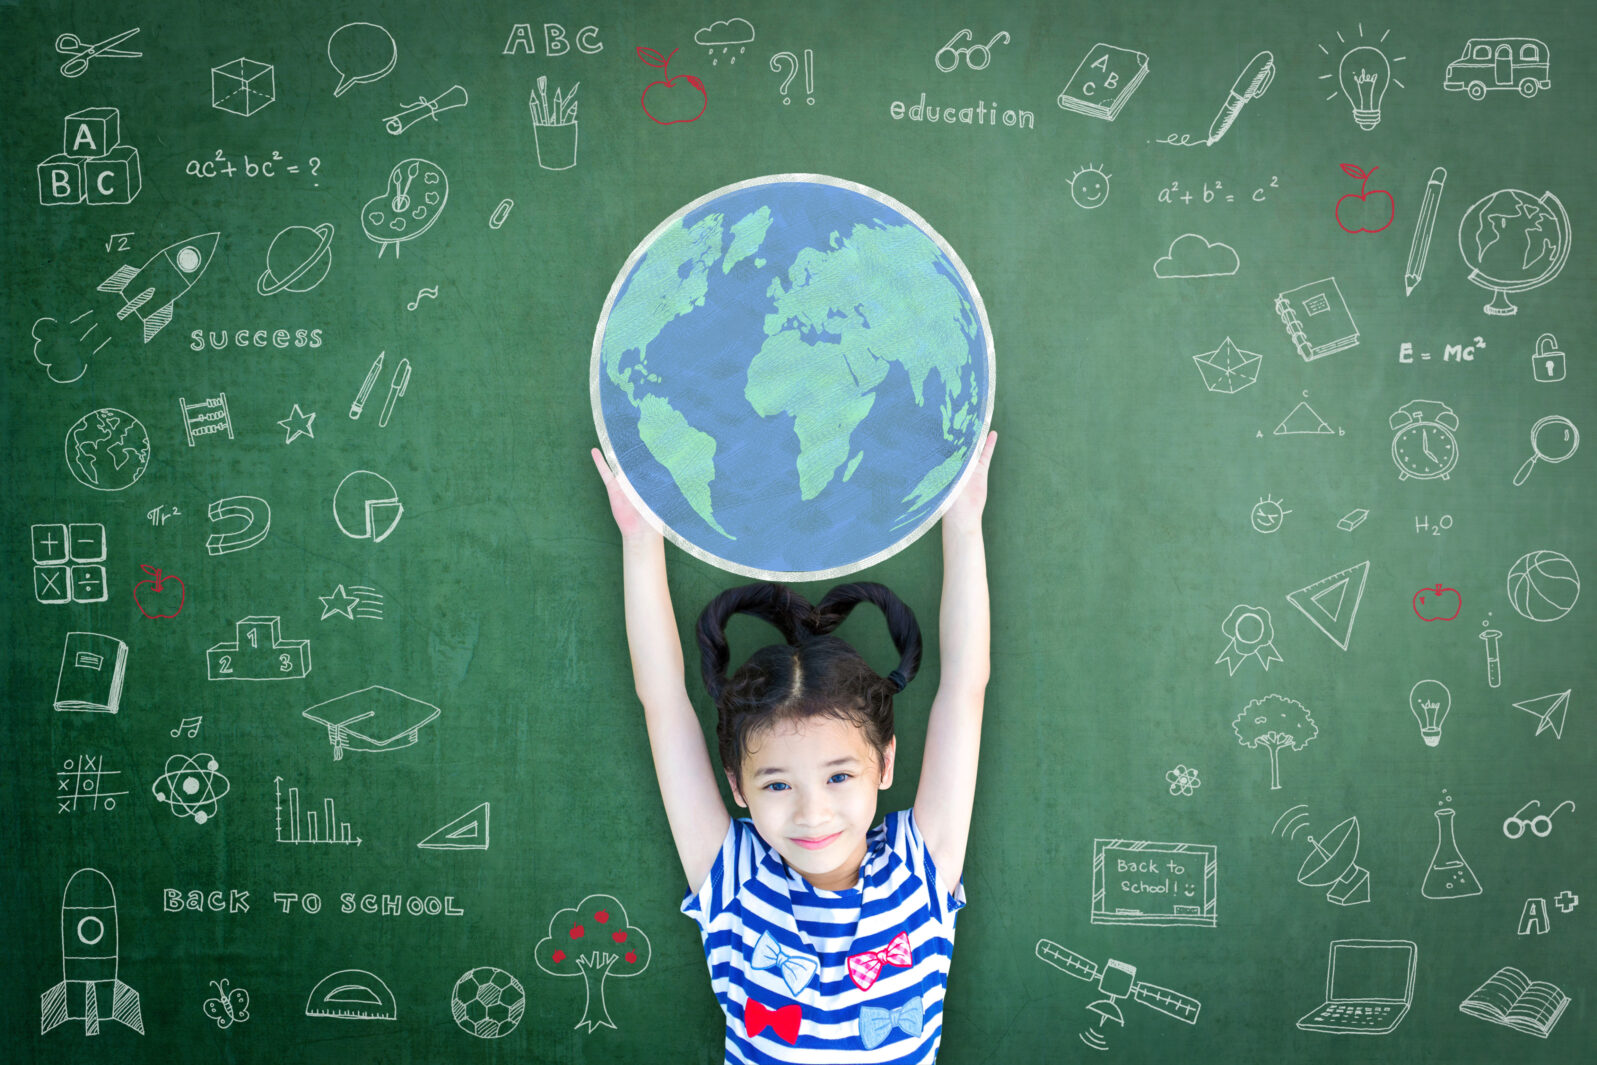 Educated school kid lifting world globe chalk doodle drawing on green chalkboard for education concept